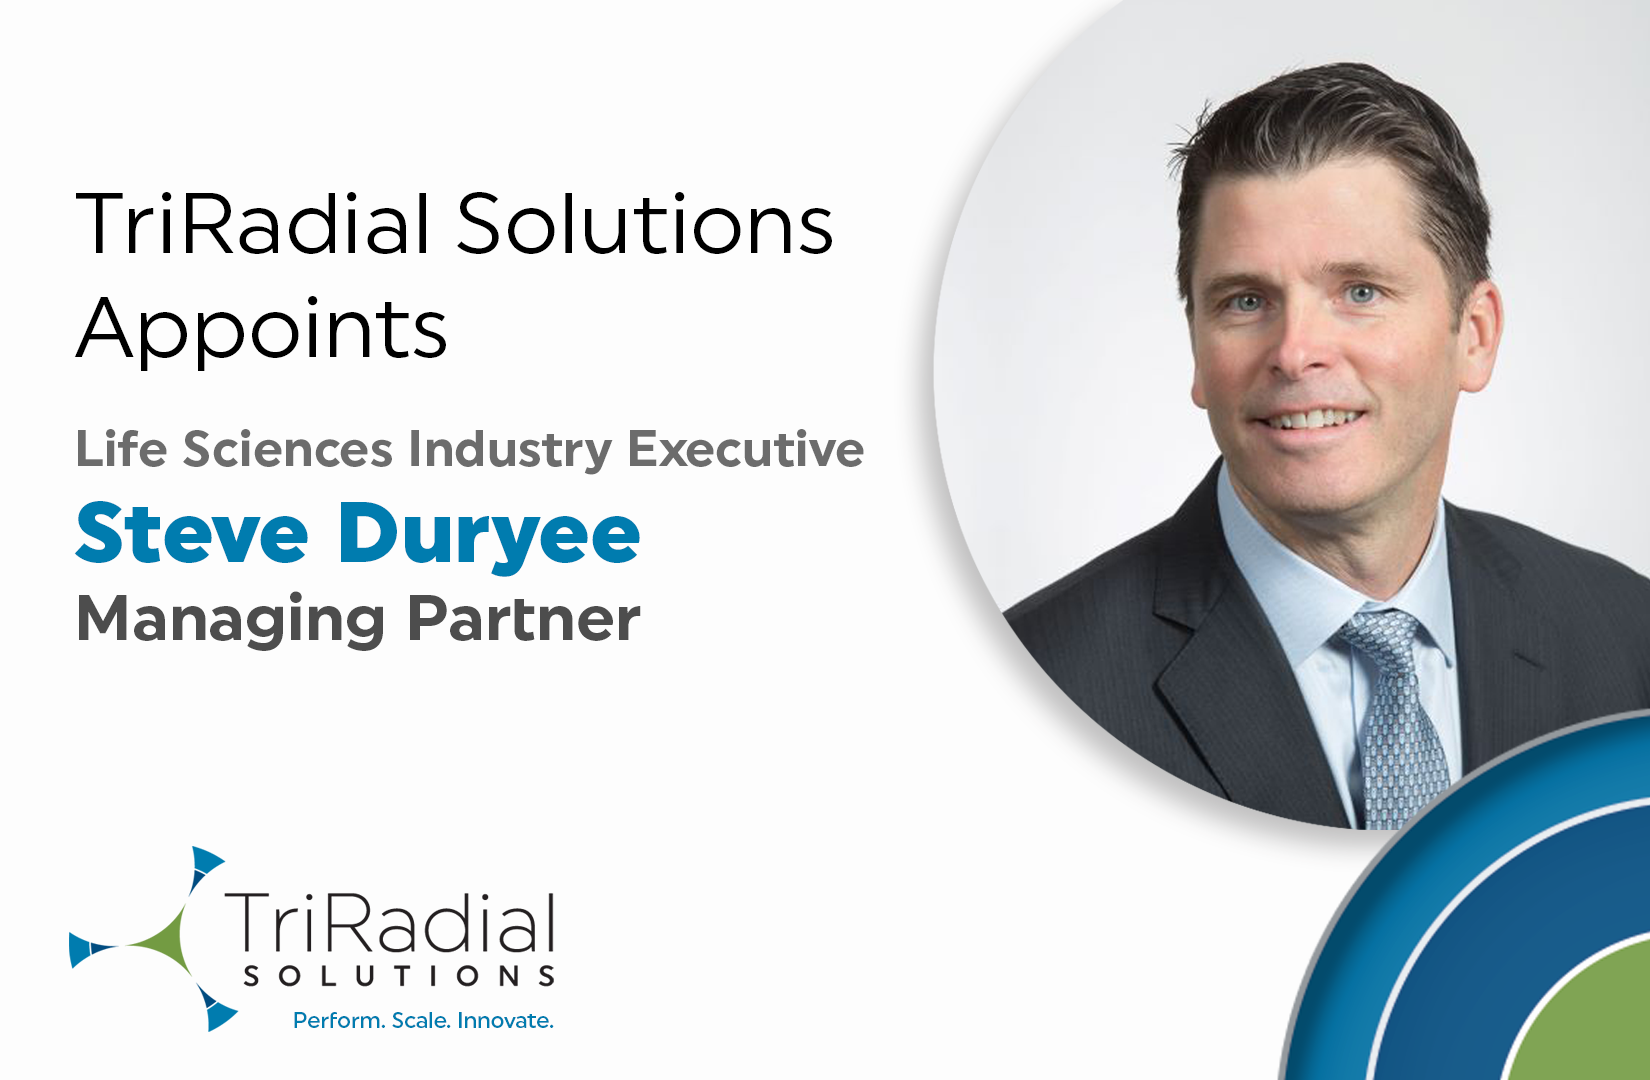 Steve Duryee Appointed Managing Partner of TriRadial Solutions